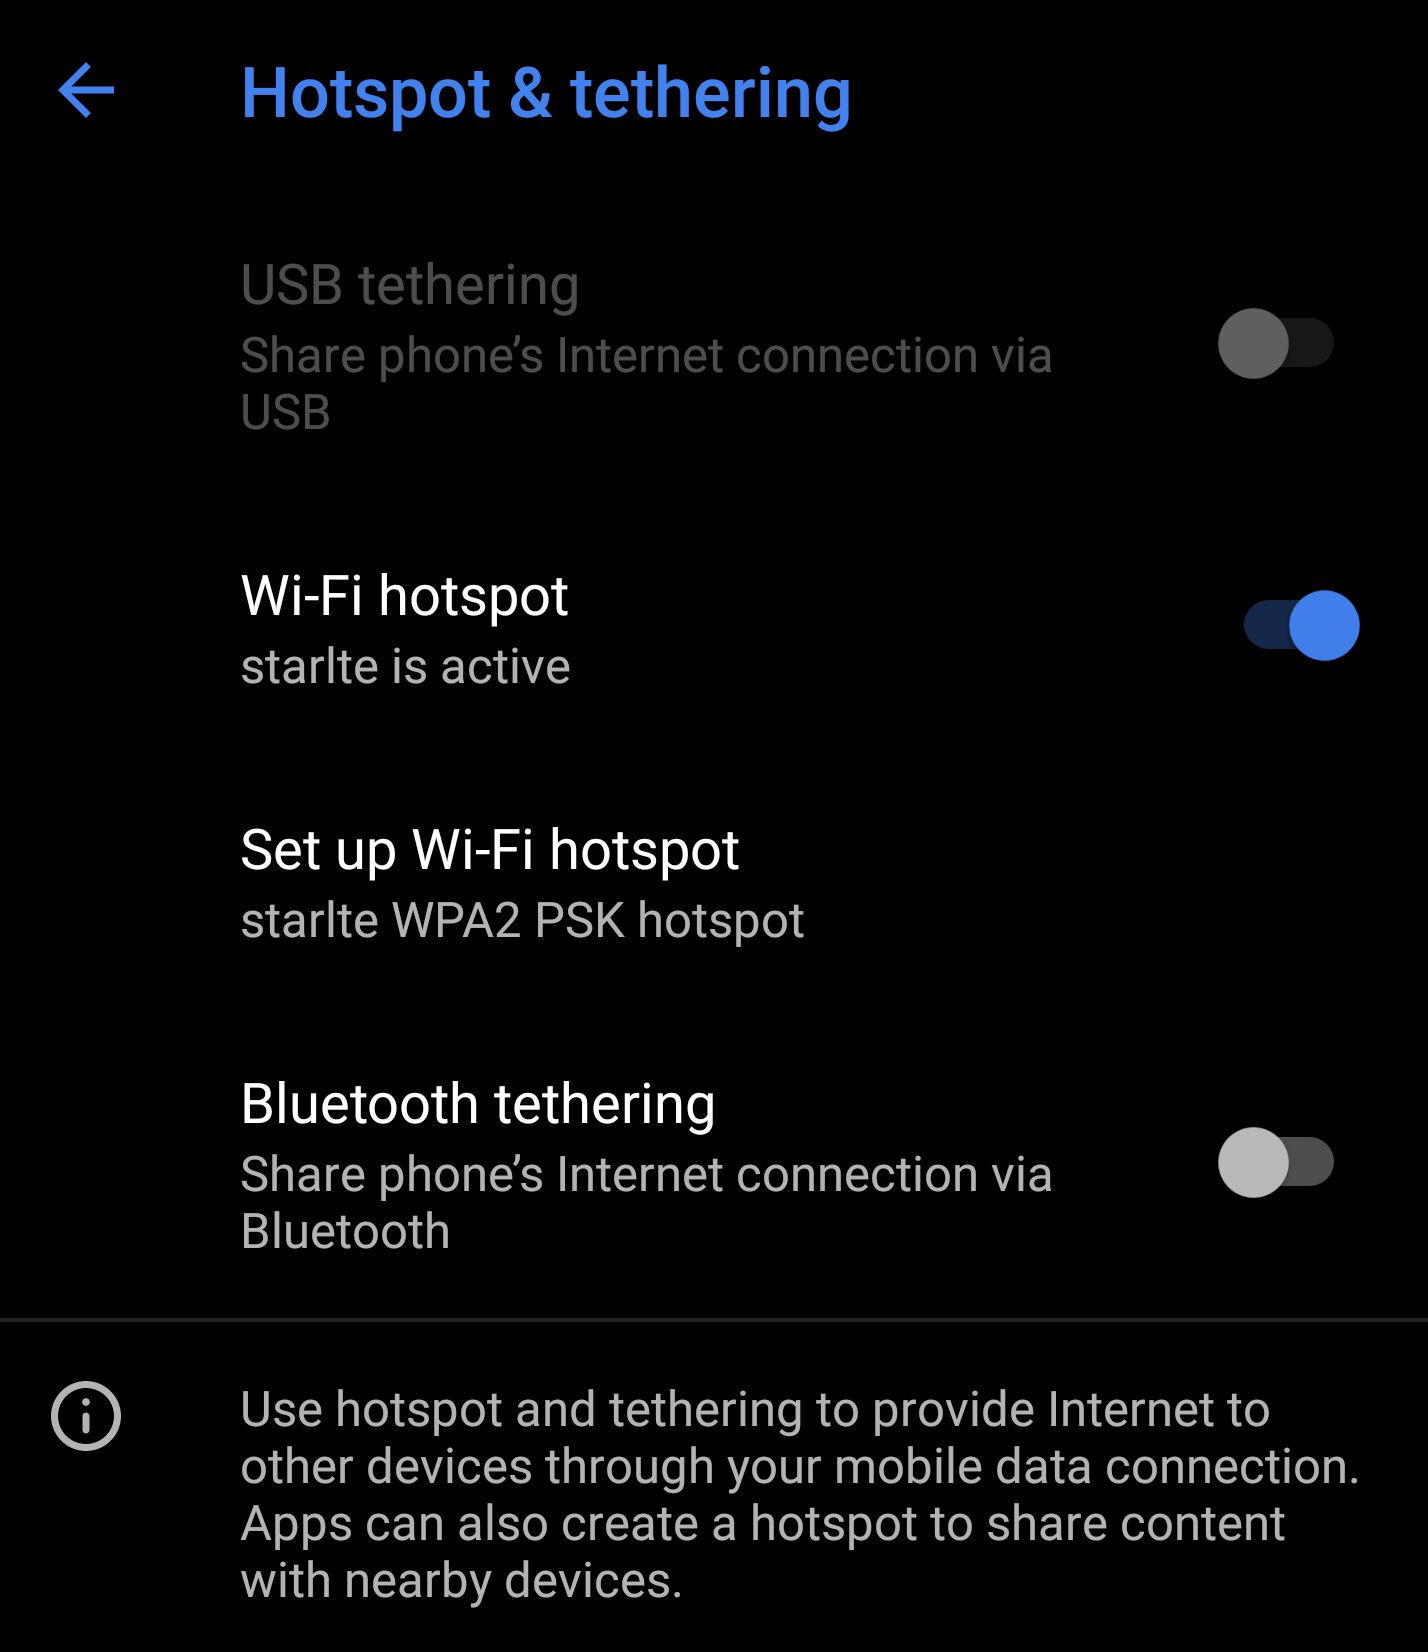 Start the mobile hotspot on your phone